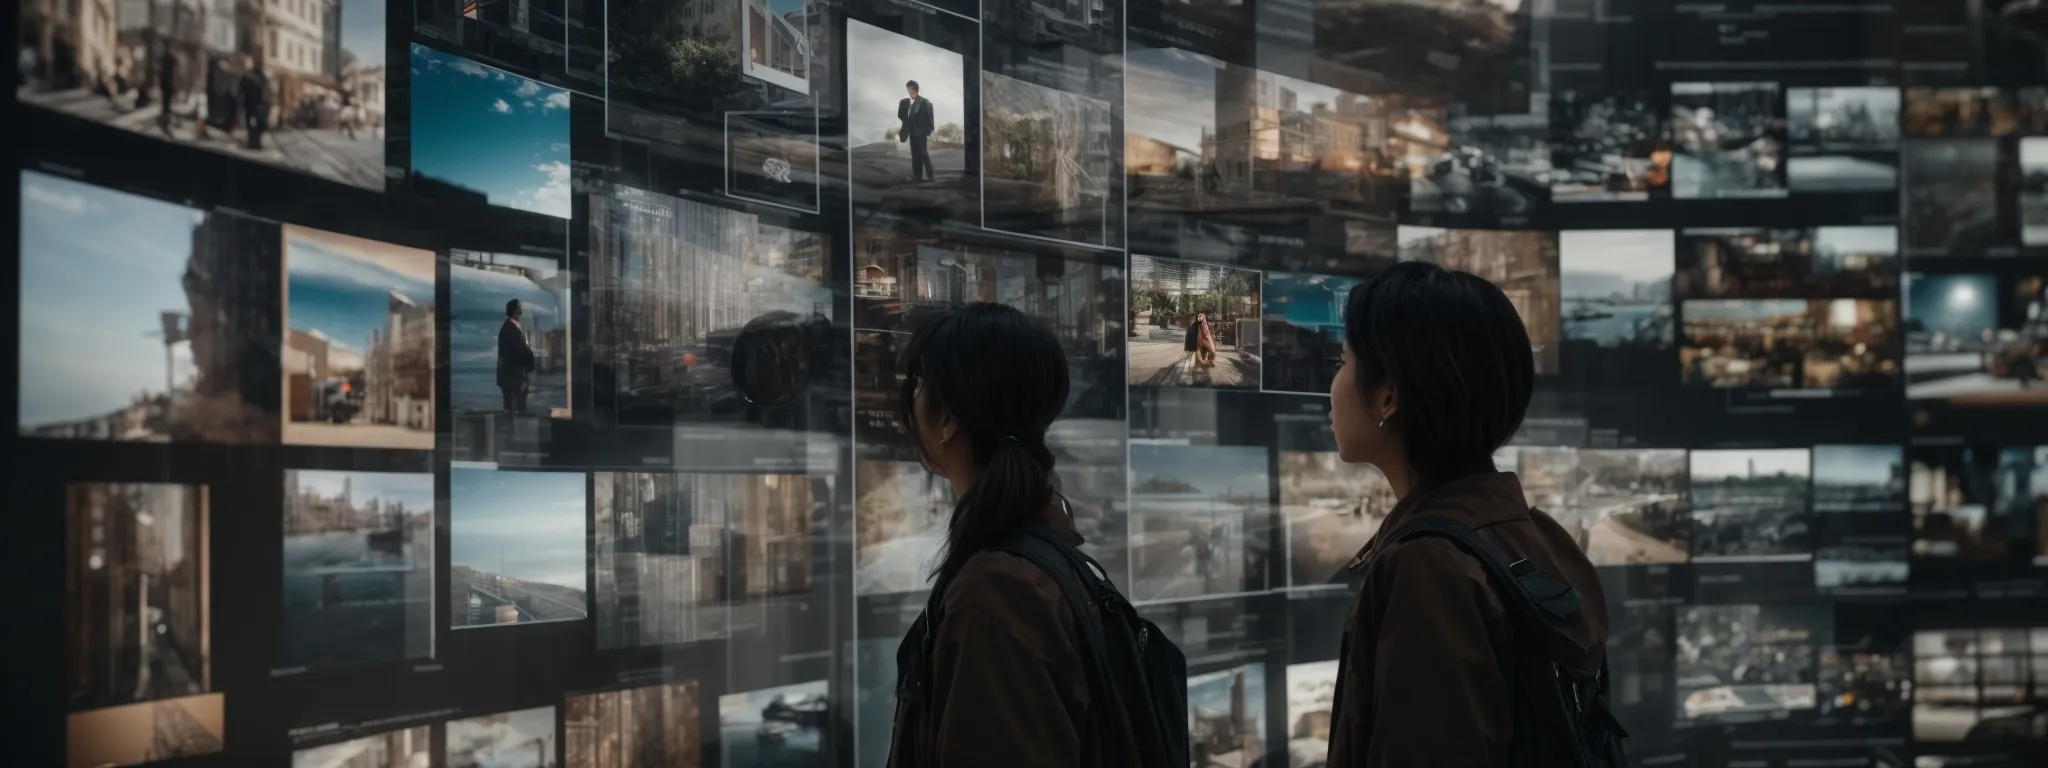 a person gazes at a vast array of images on a digital screen, exploring the interface of a modern visual search platform.